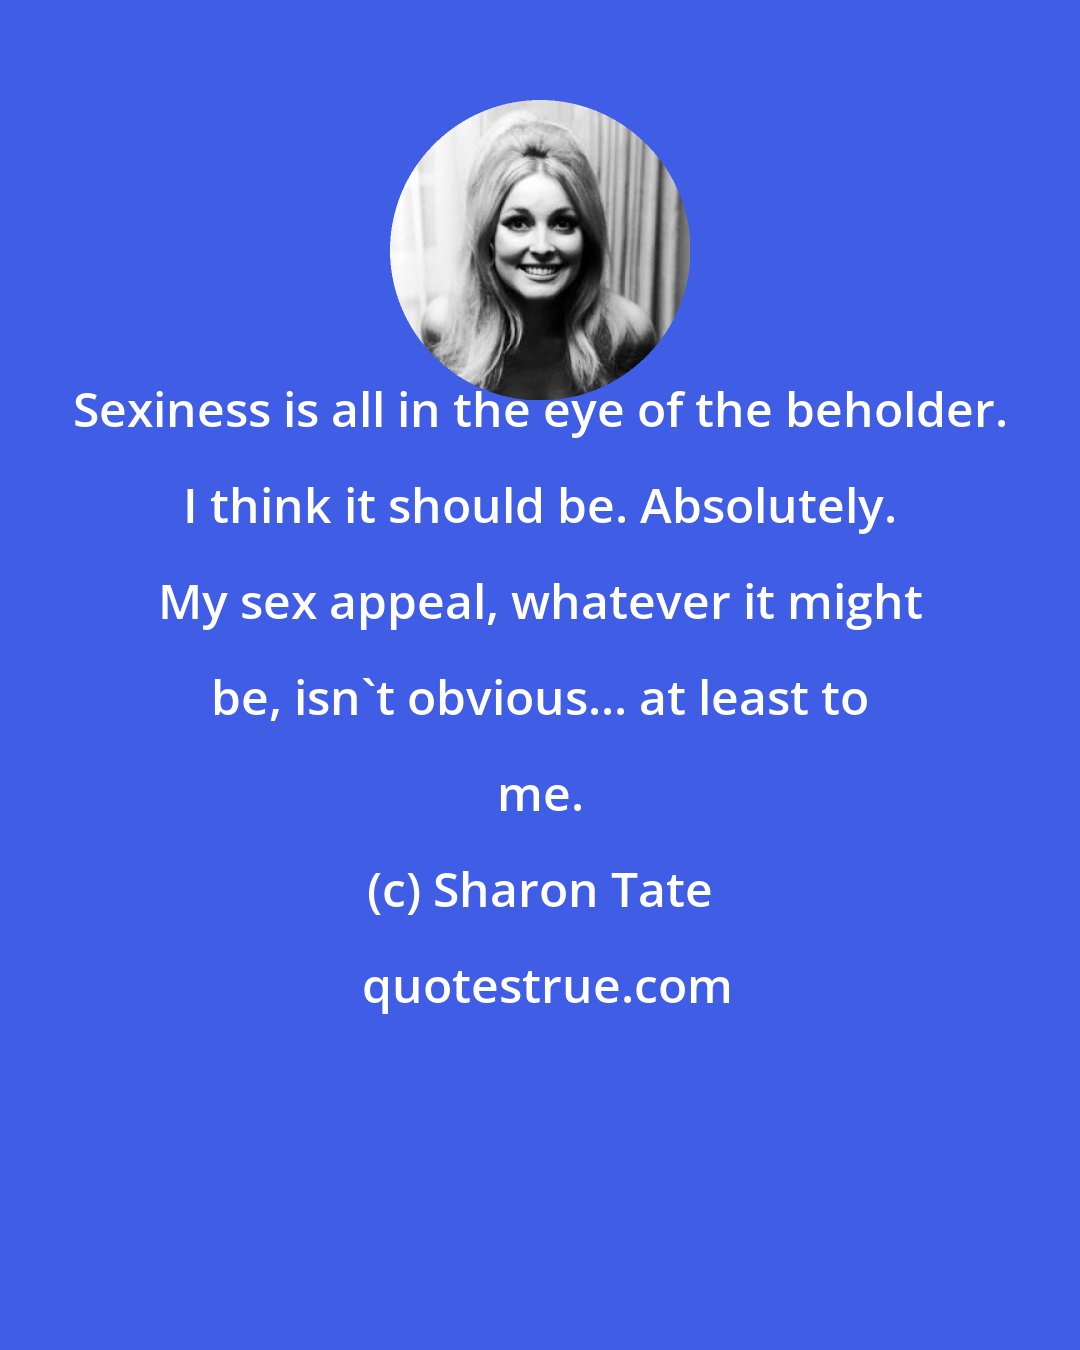 Sharon Tate: Sexiness is all in the eye of the beholder. I think it should be. Absolutely. My sex appeal, whatever it might be, isn't obvious... at least to me.